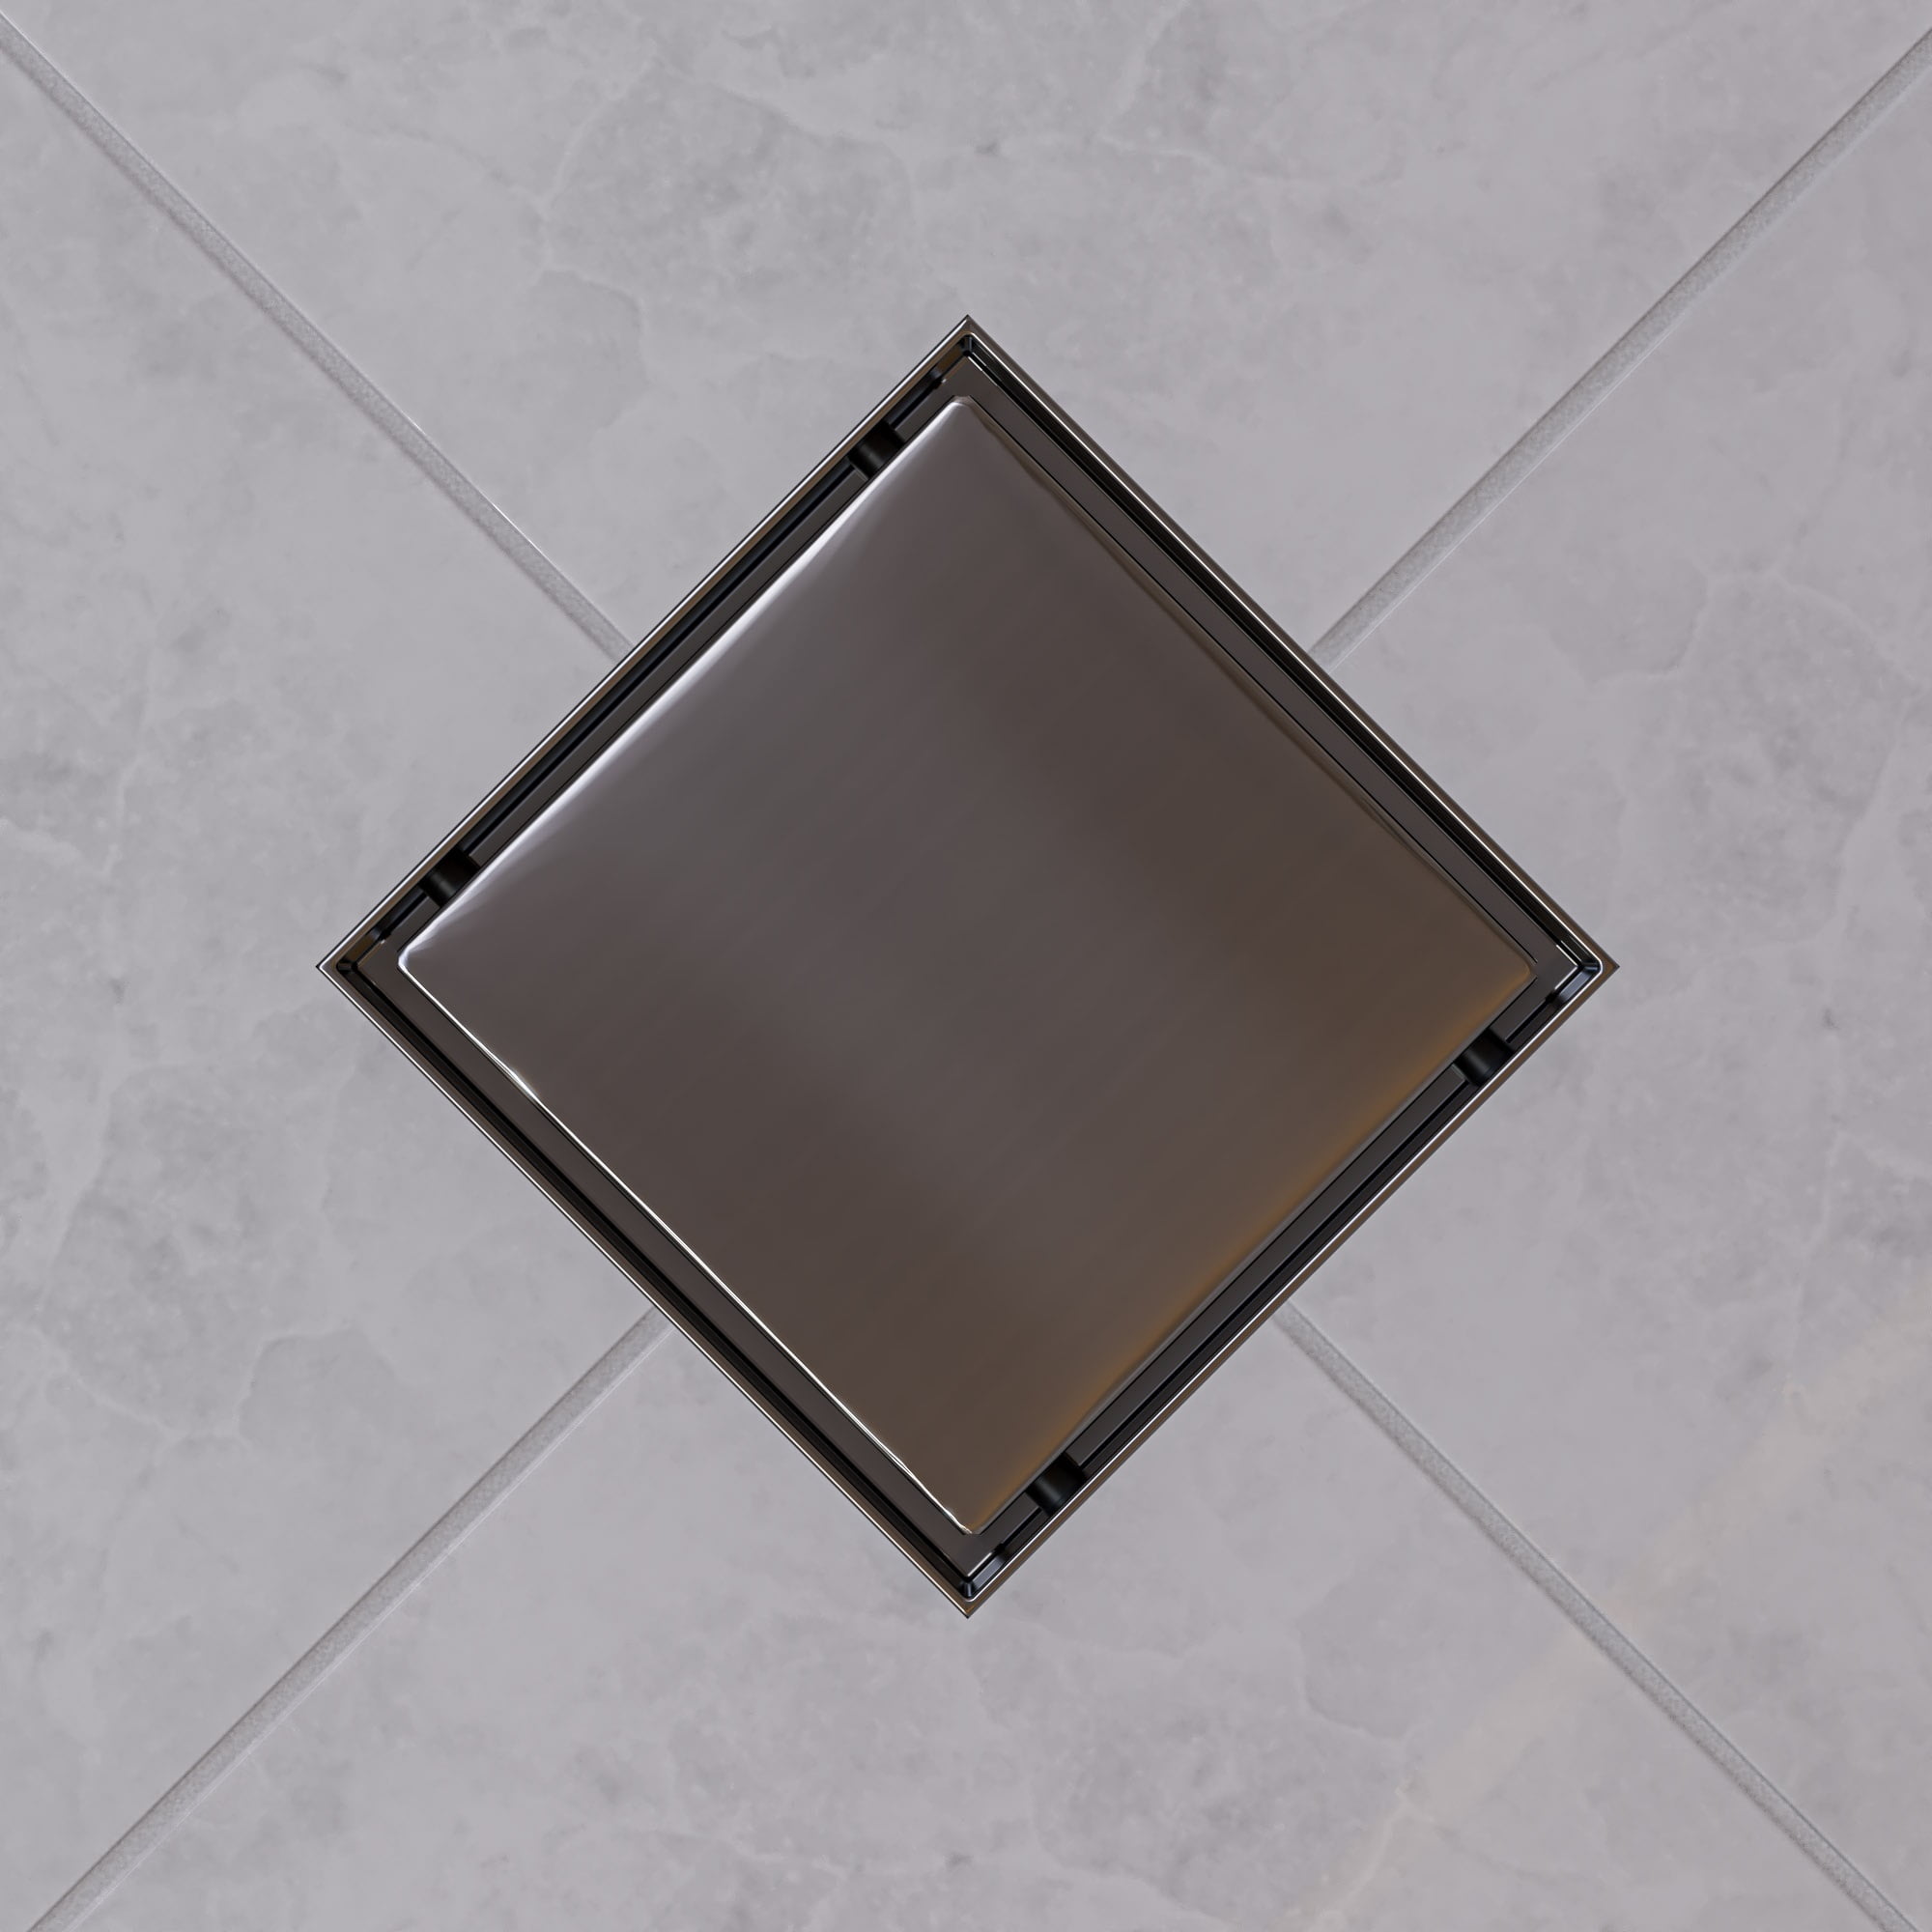 Absd55b-pss Modern Square Polished Stainless Steel Shower Drain With Solid Cover - 5 X 5 In.